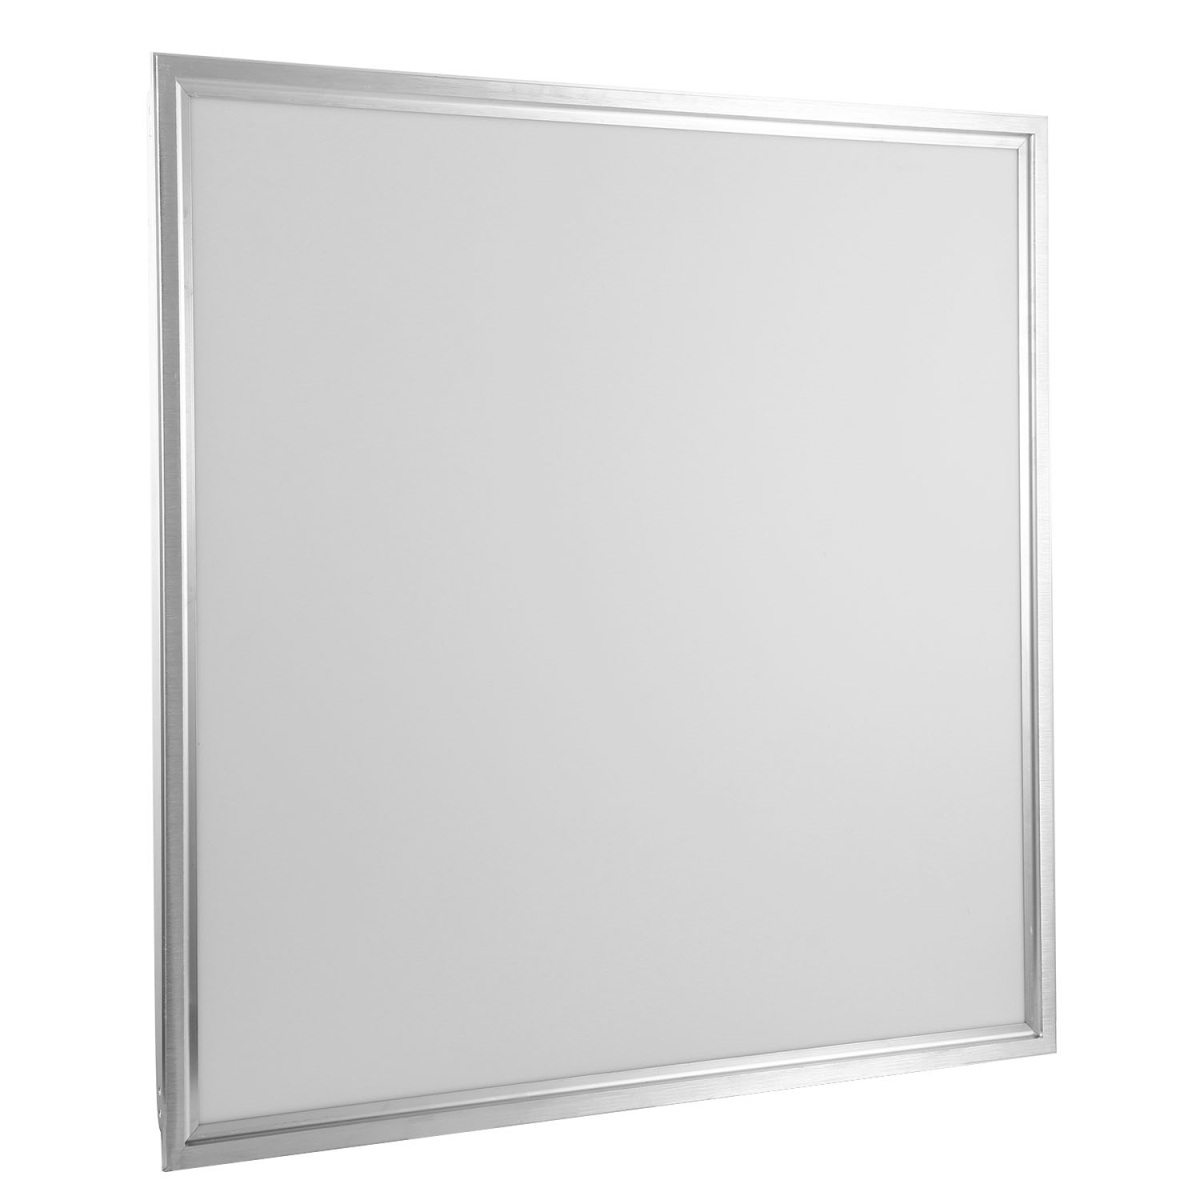 Picture of Fresh Fab Finds FFF-GPCT1664 2 x 2 ft. 48W 3200 Lumens 7500K Ceiling Lighting 150W Equivalent LED Troffer Recessed Edge-Lit LED Panel Light - Unisex